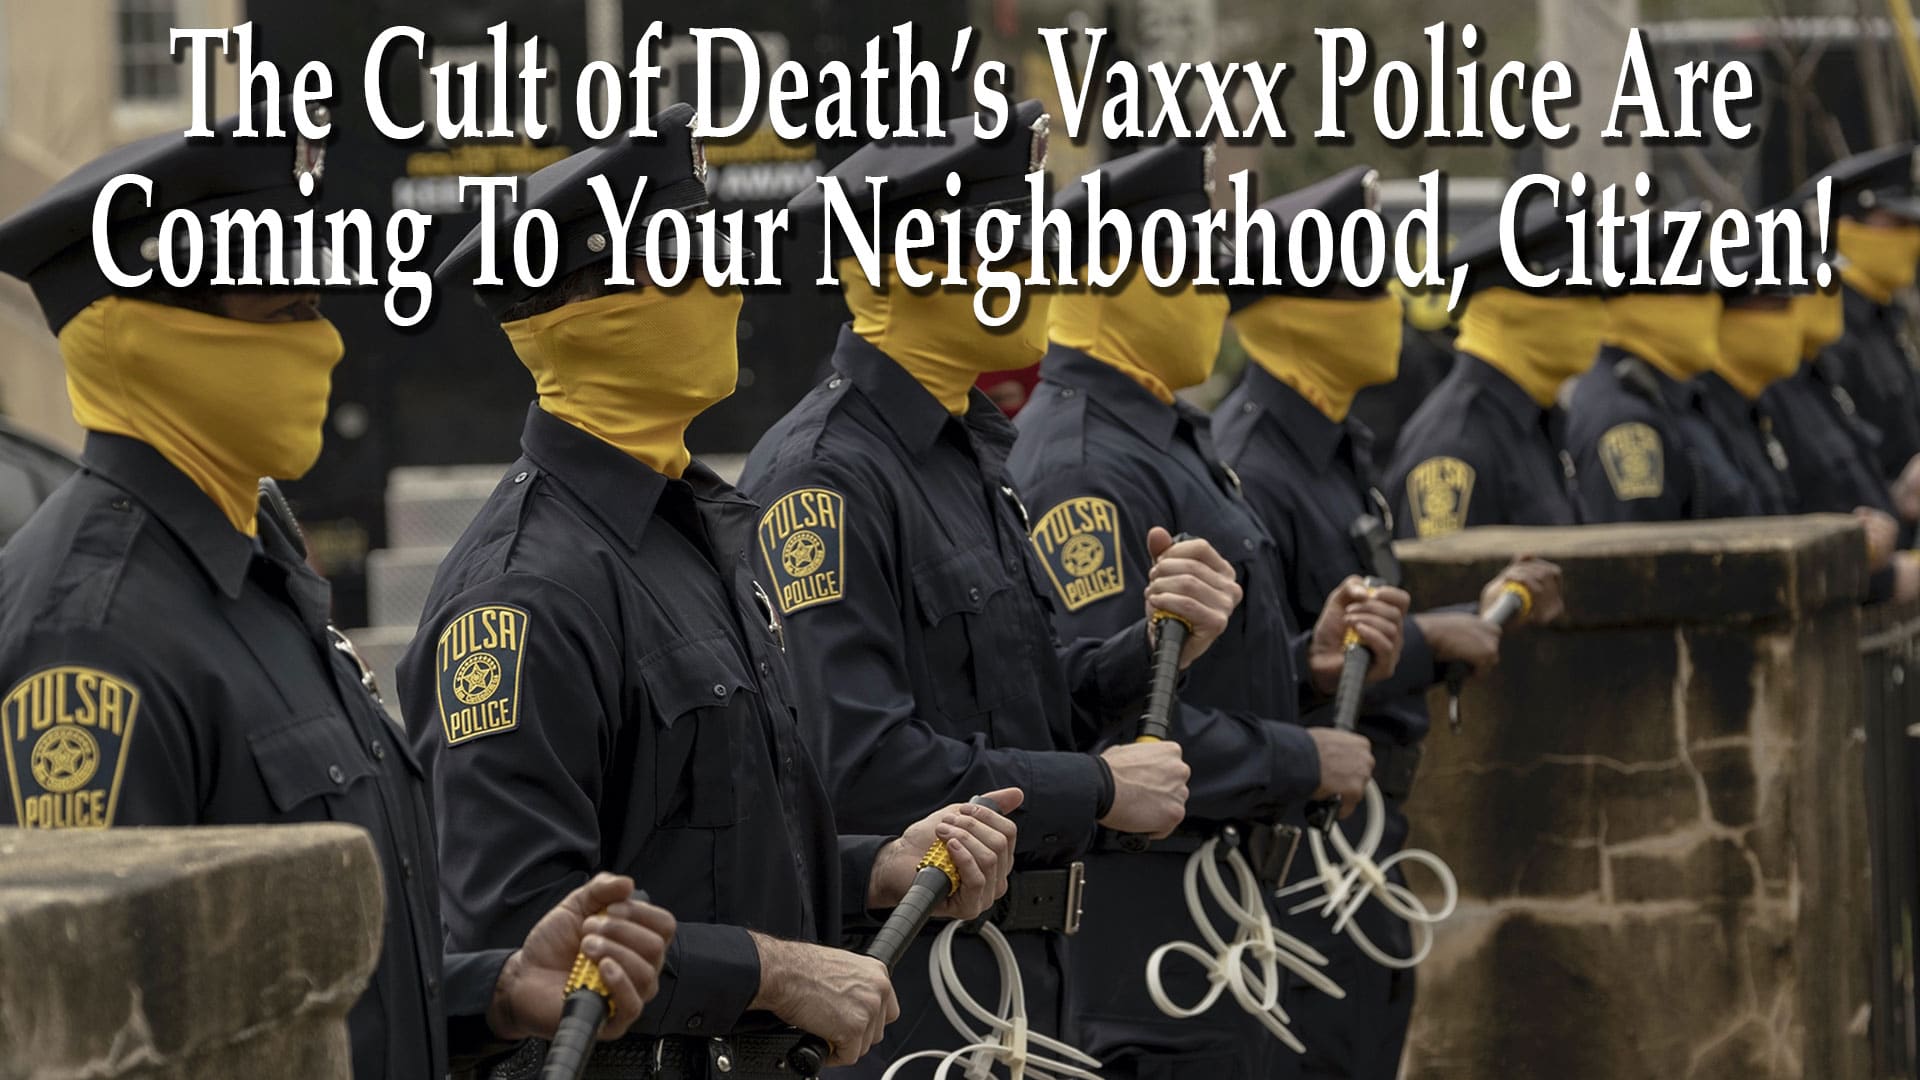 The Cult of Death Vaxxx Police Are Coming To Your Neighborhood, Citizen! - Mike Church Show